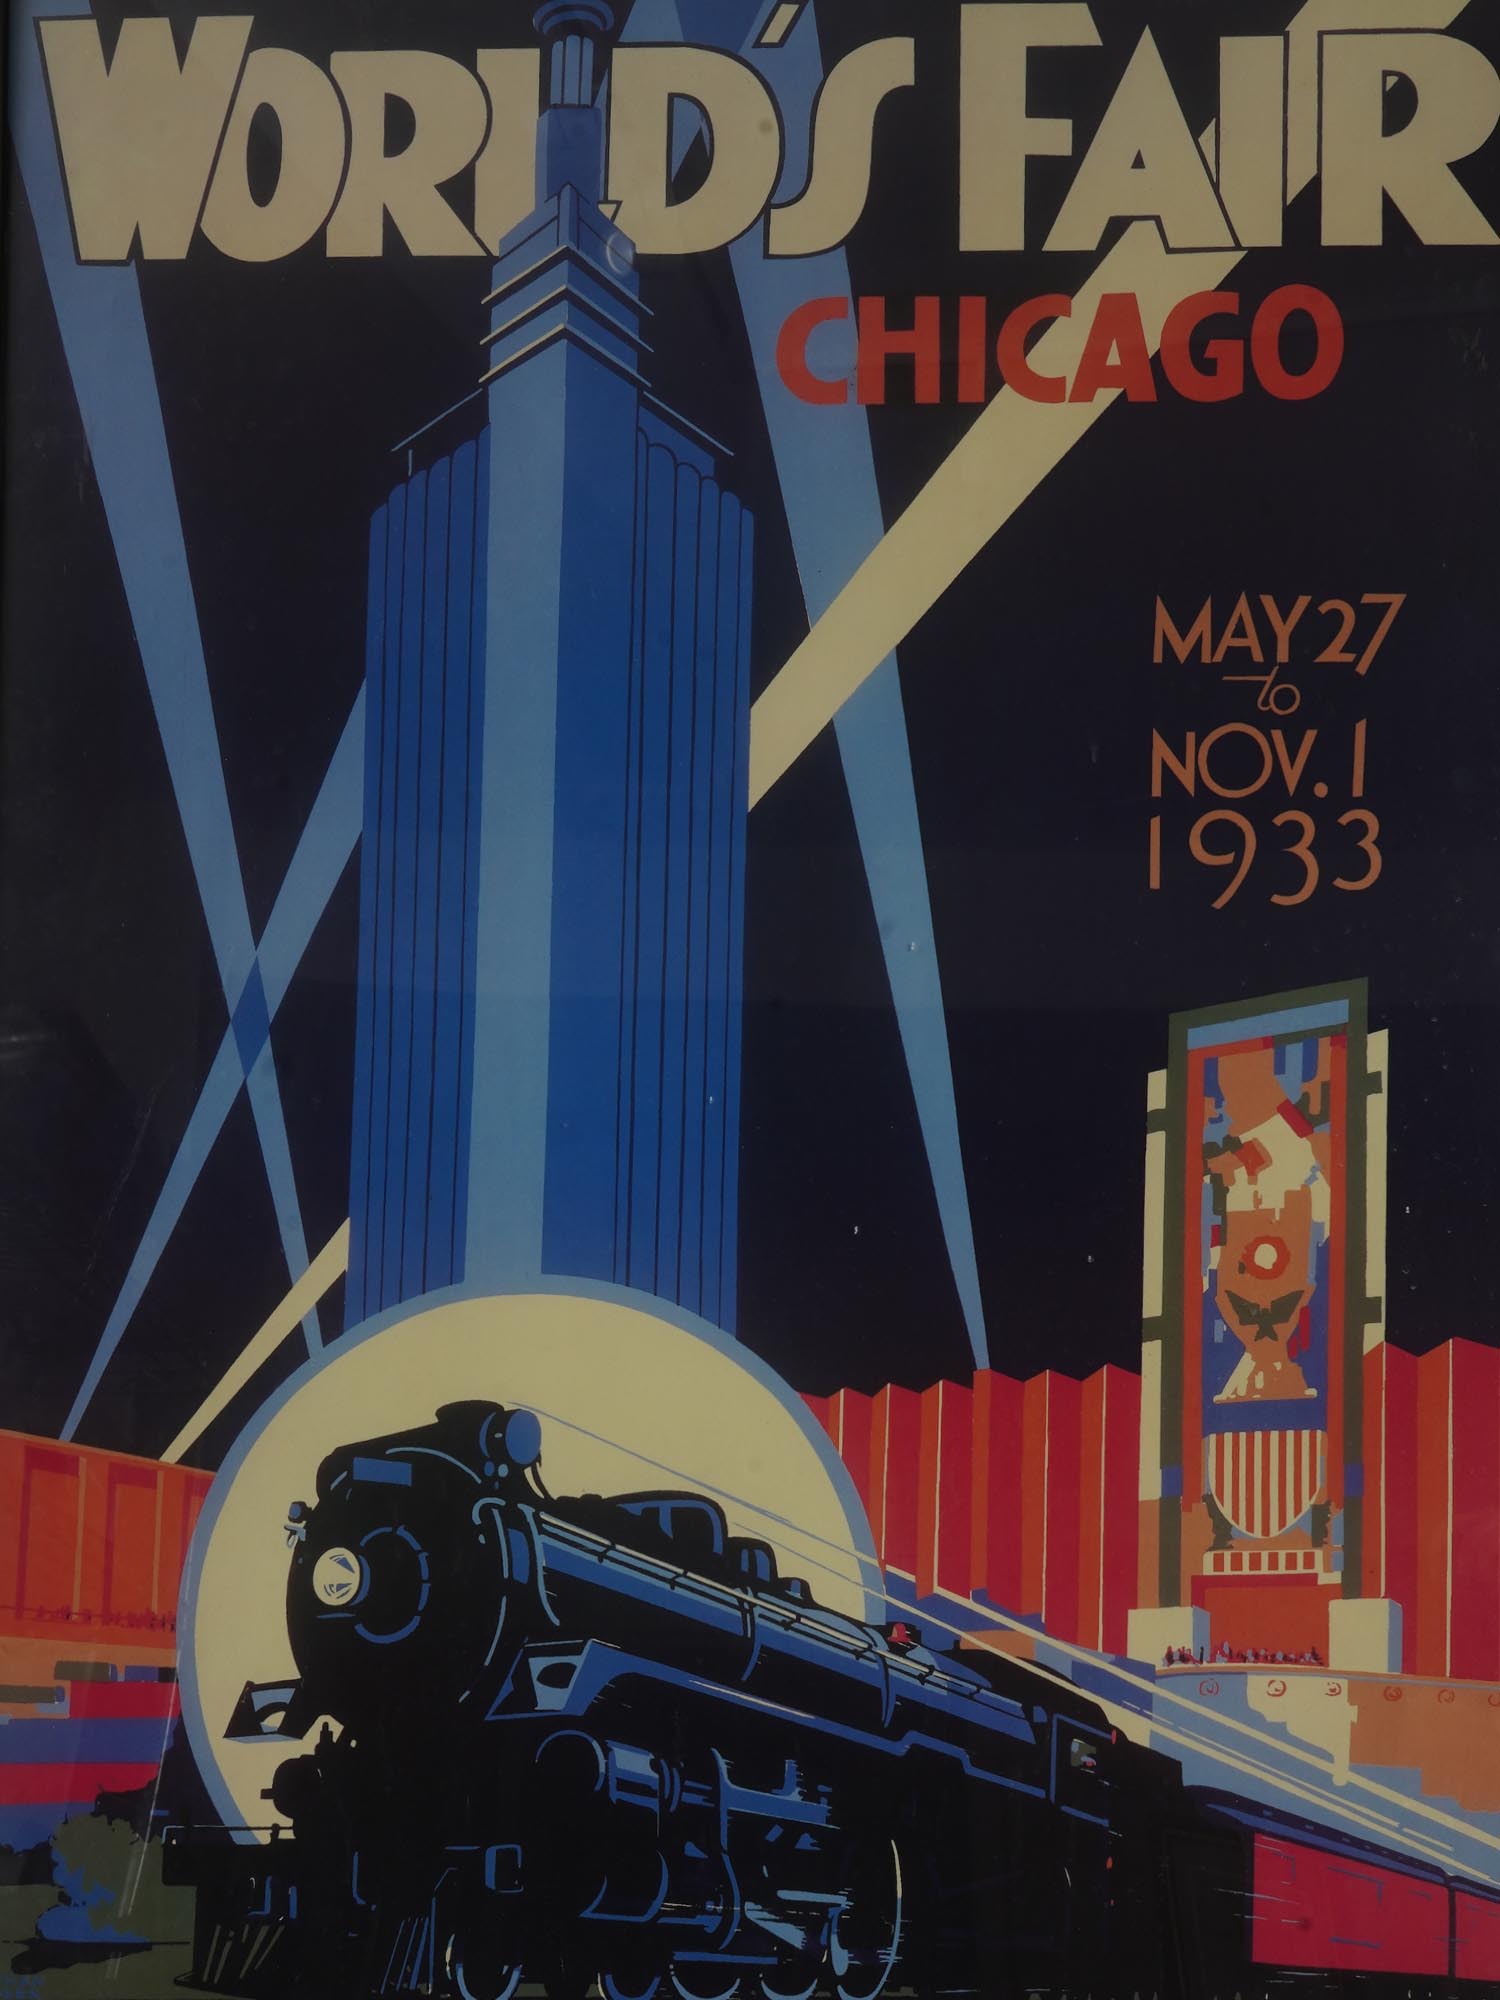 1933 AMERICAN WORLDS FAIR CHICAGO LITHOGRAPHIC POSTER PIC-1